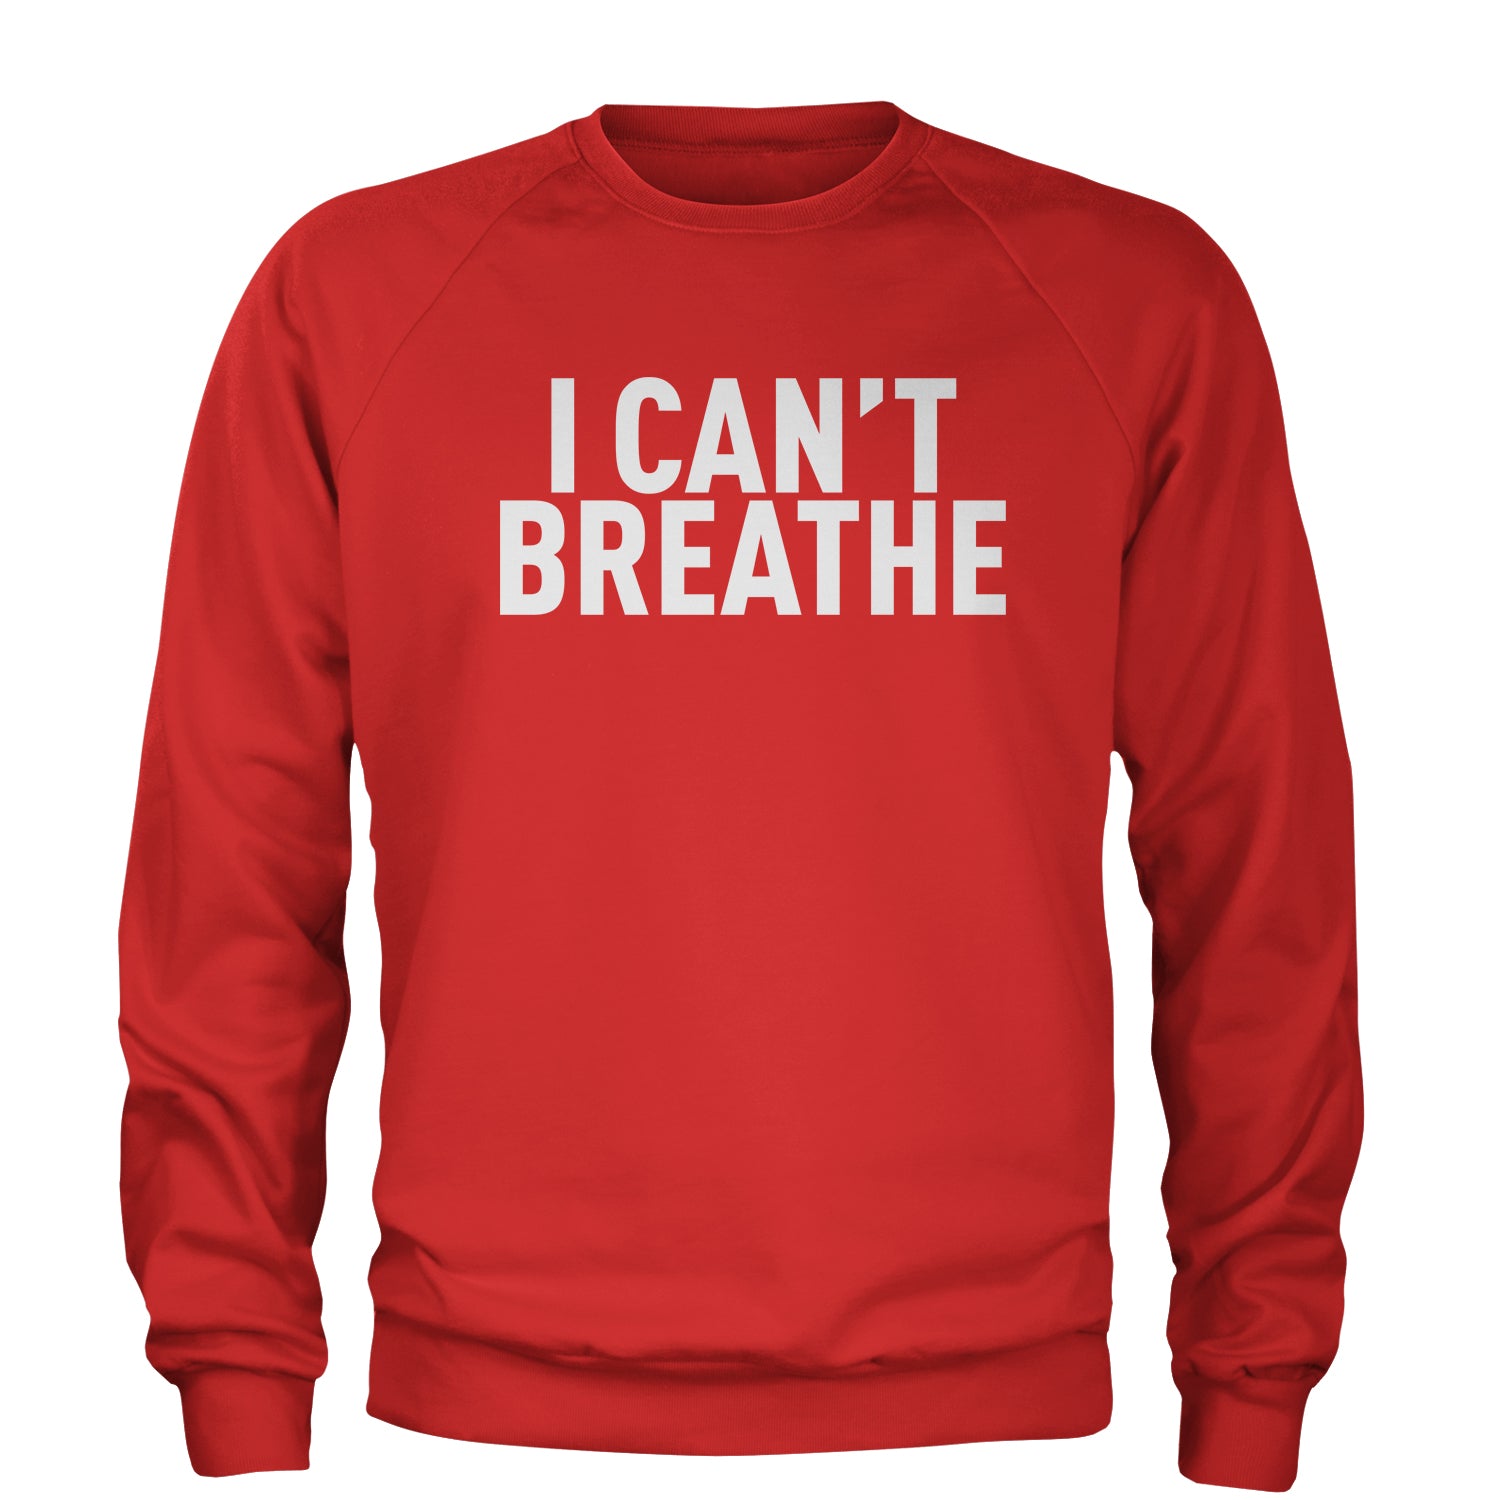 I Can't Breathe Social Justice Adult Crewneck Sweatshirt african, africanamerican, american, black, blm, breonna, floyd, george, life, lives, matter, taylor by Expression Tees